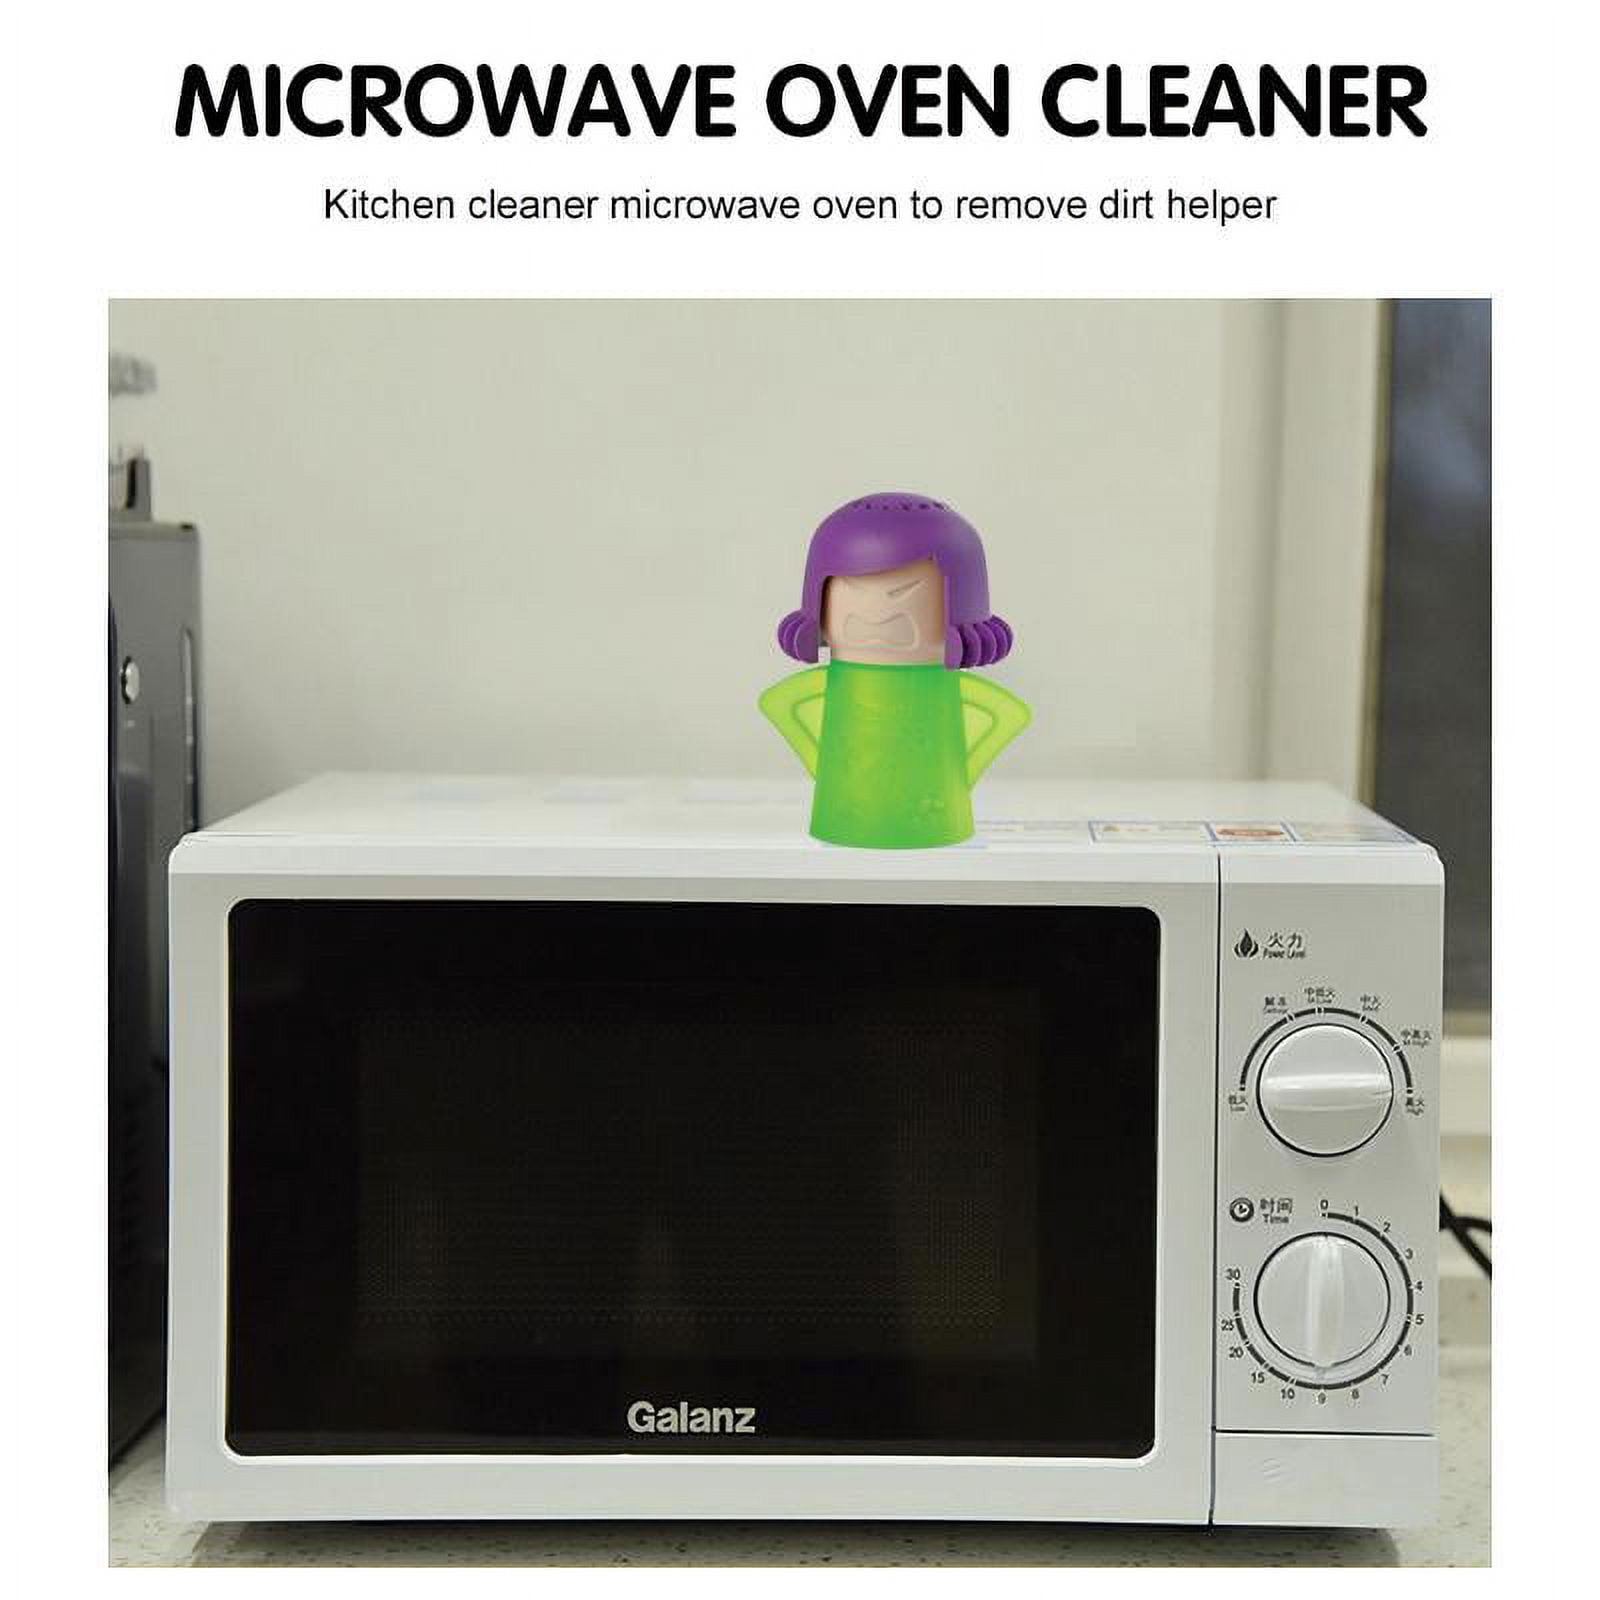 VONTER Angry Mama Microwave Cleaner Angry Mom Microwave Oven Steam Cleaner  Easily Cleans The Crud in Minutes. Steam Cleans with Vinegar and Water for  Home or Office Kitchens-Green 